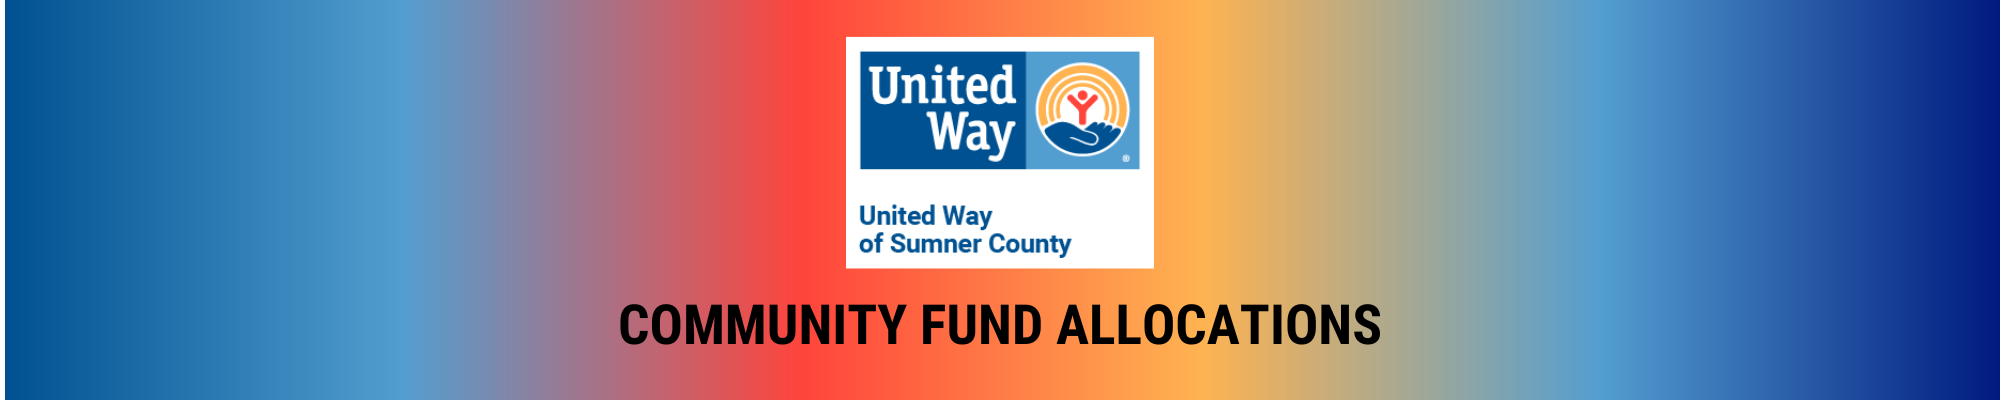 United Way of Sumner County Community Fund Allocations